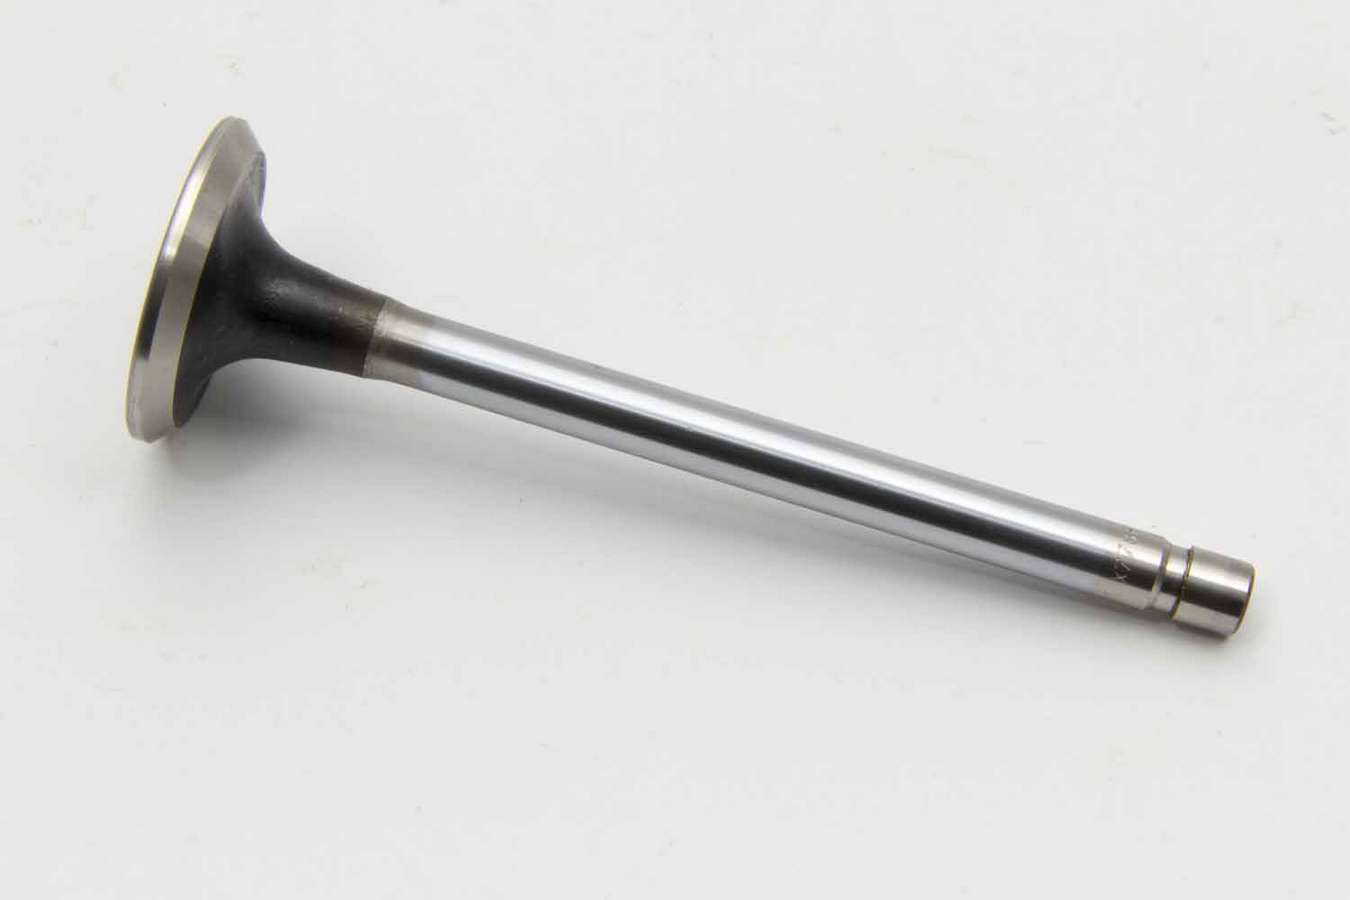 Manley 10077-1 Exhaust Valve, Budget Series, 1.500 in Head, 0.342 in Valve Stem, 4.920 in Long, Stainless, Small Block Chevy, Each